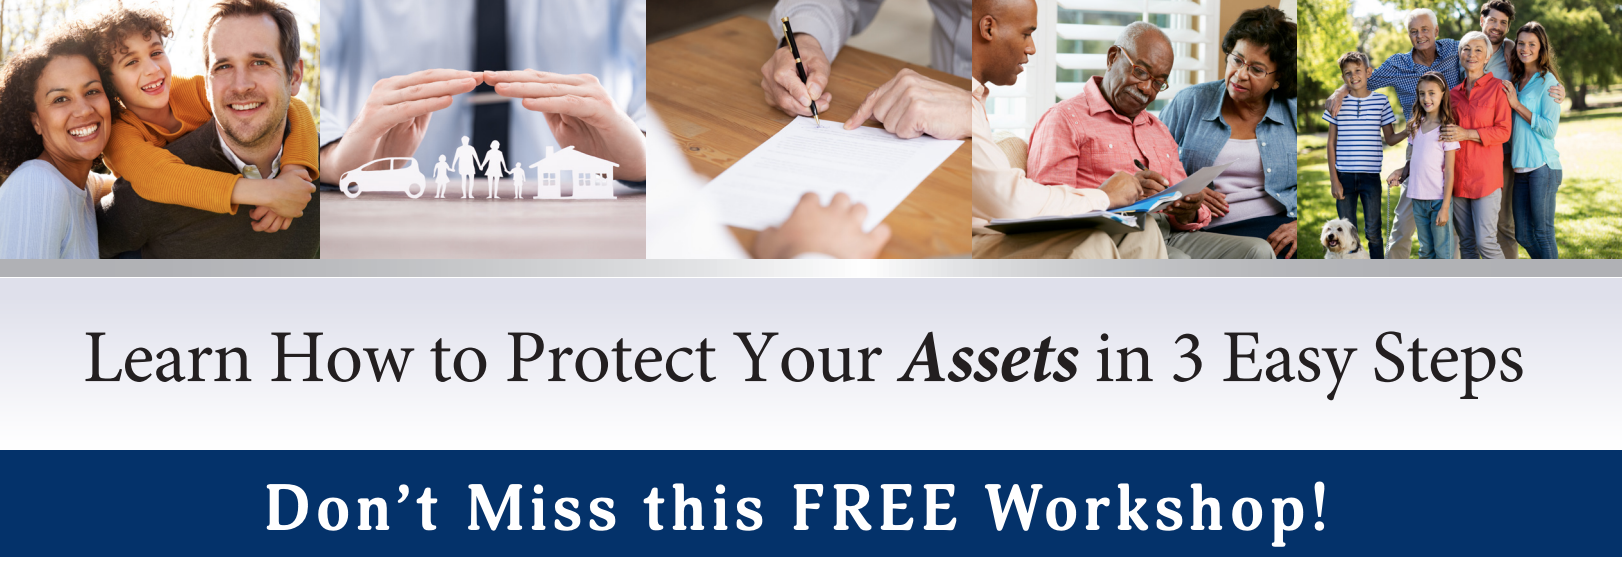 Learn How to Protect Your Assets in 3 Easy Steps